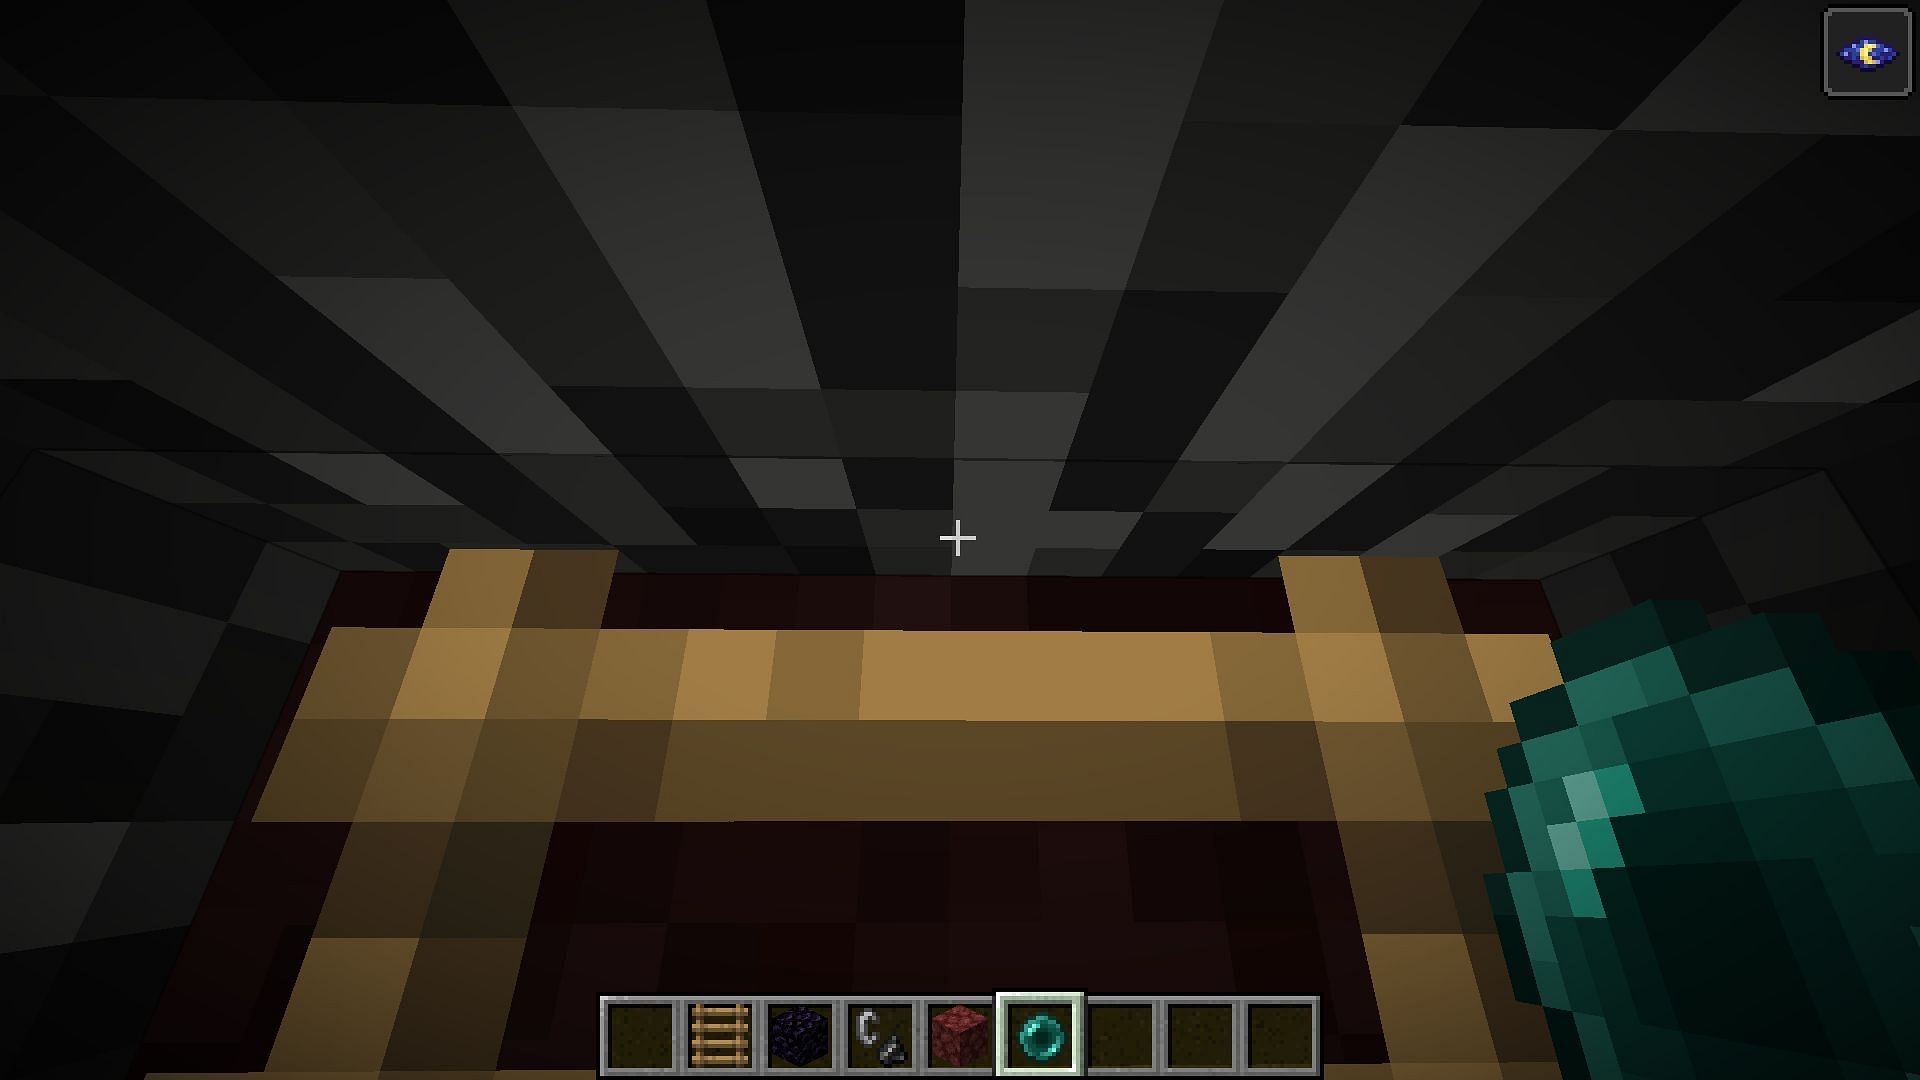 Throw ender pearl at the edge to teleport to the Nether ceiling in Minecraft (Image via Mojang)